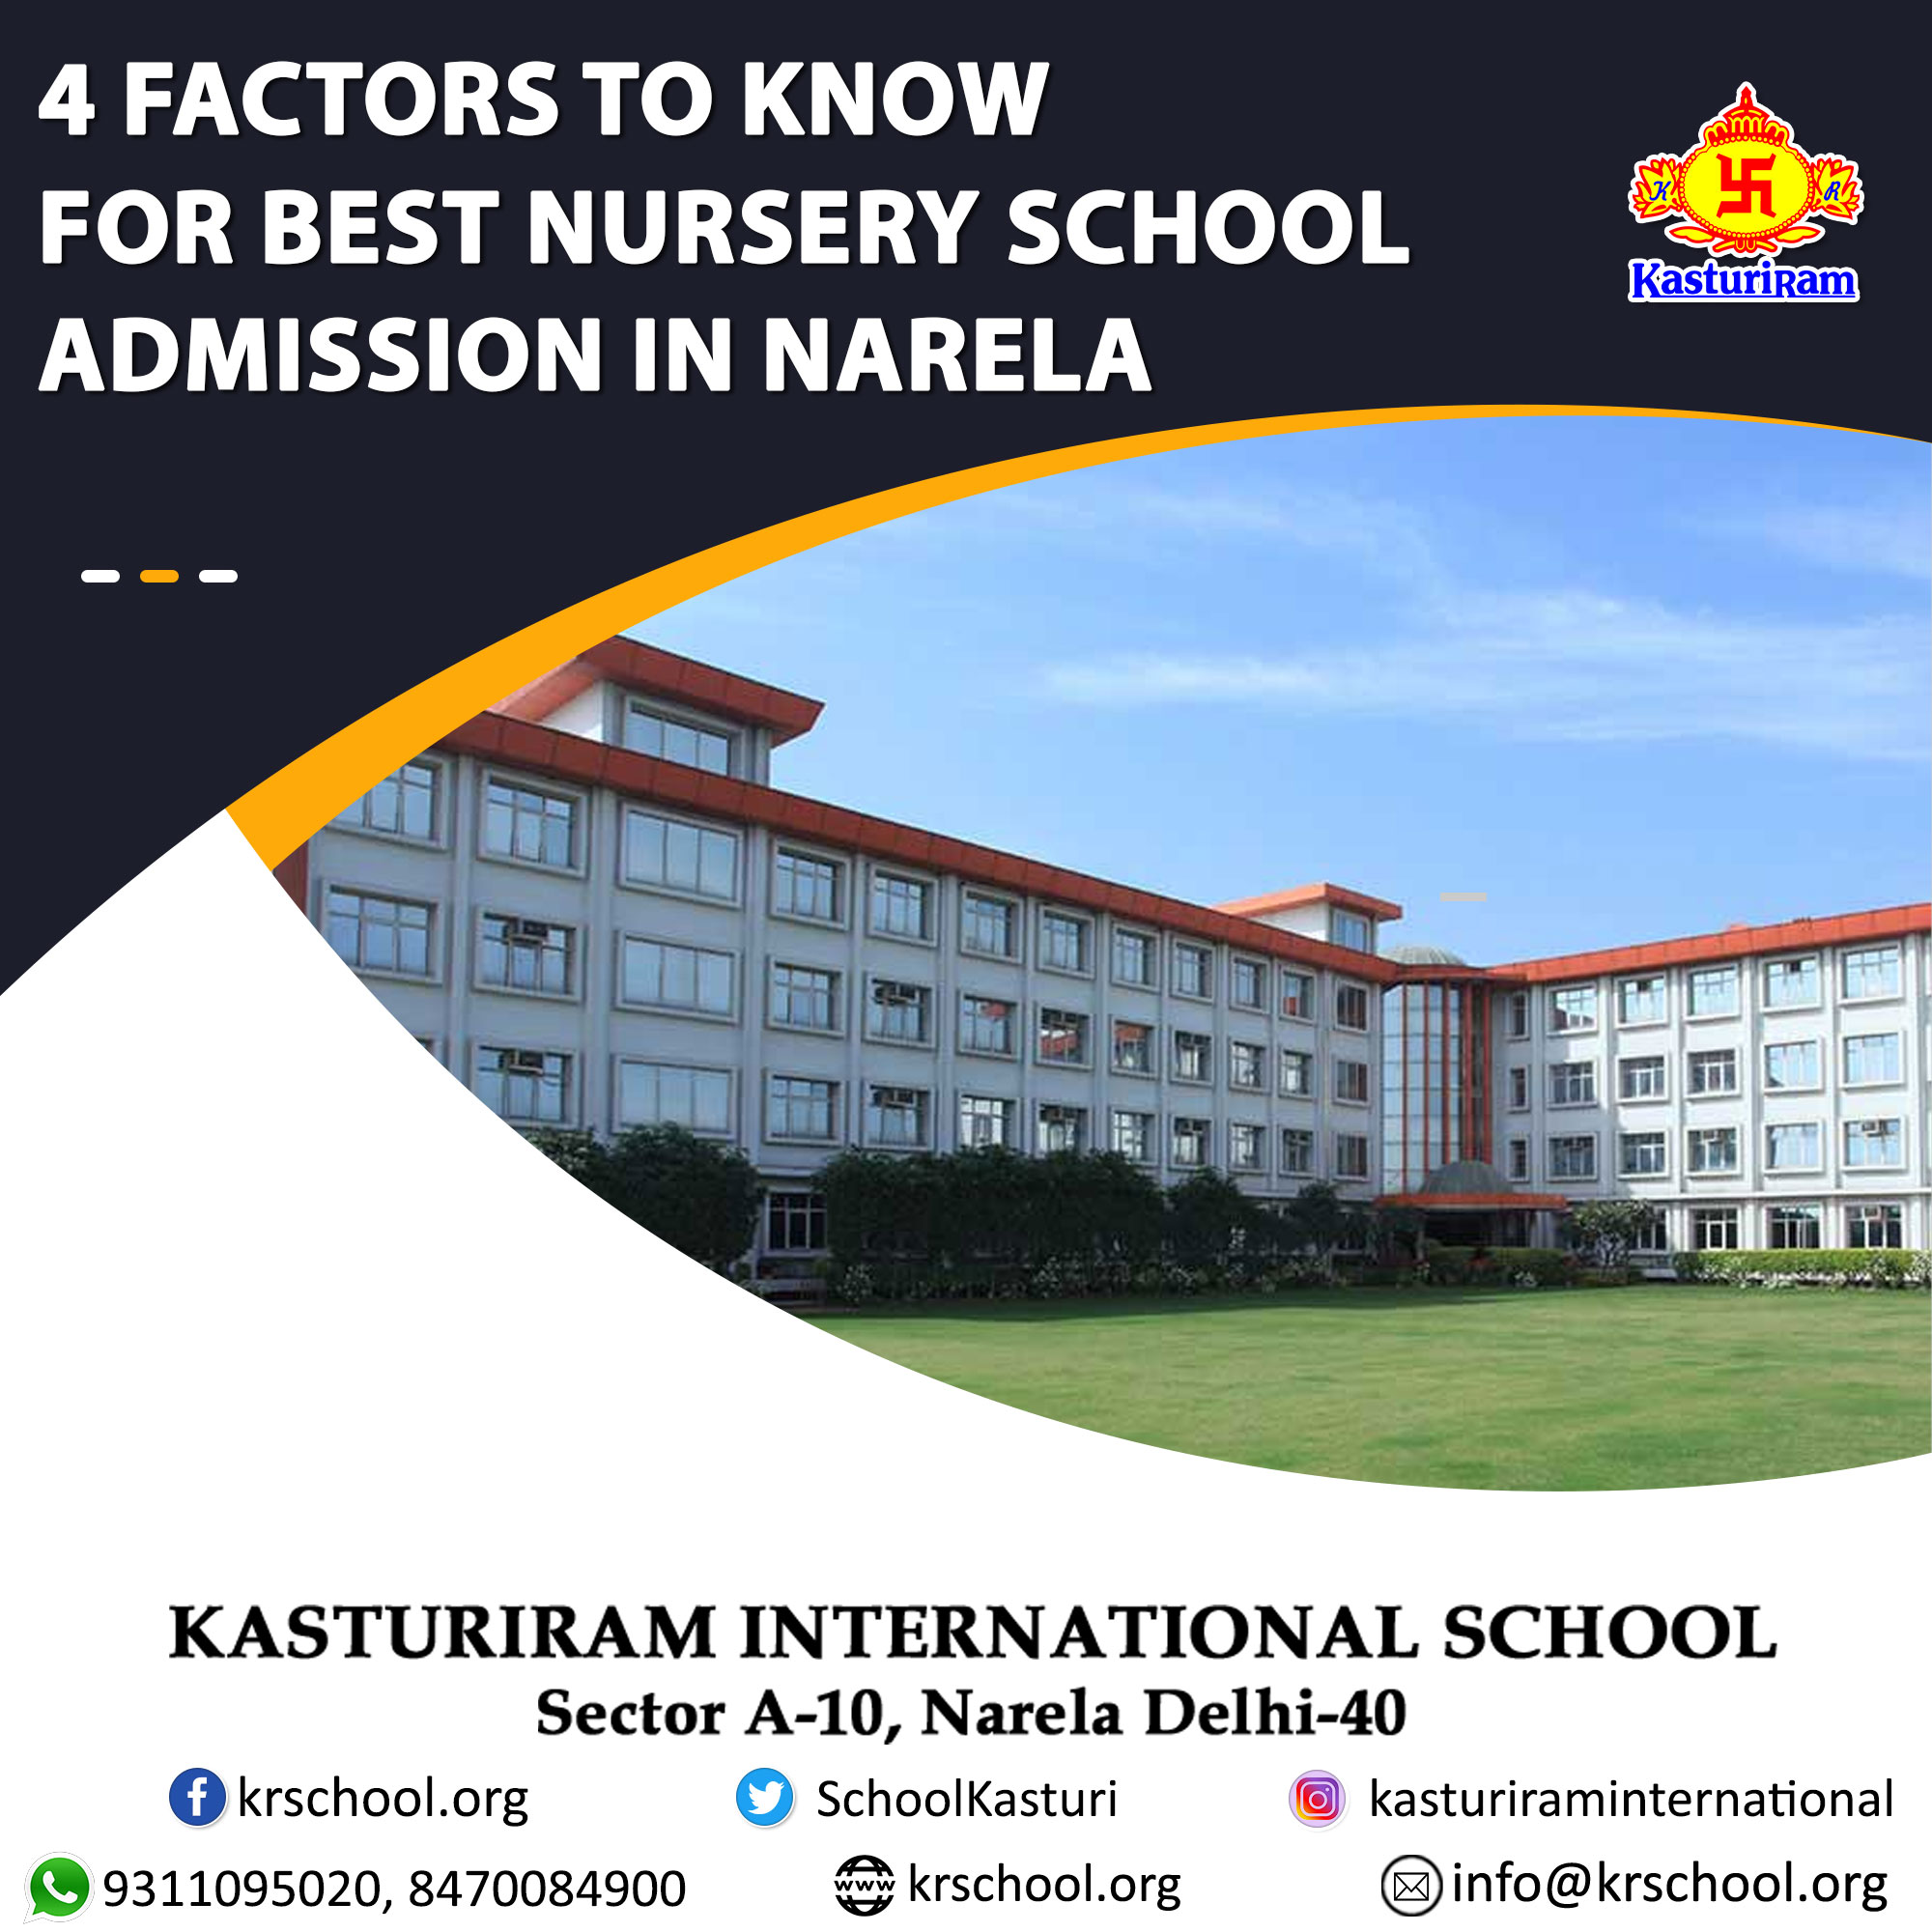 4 Factors to Know for Best Nursery School Admission in Narela - Image 1